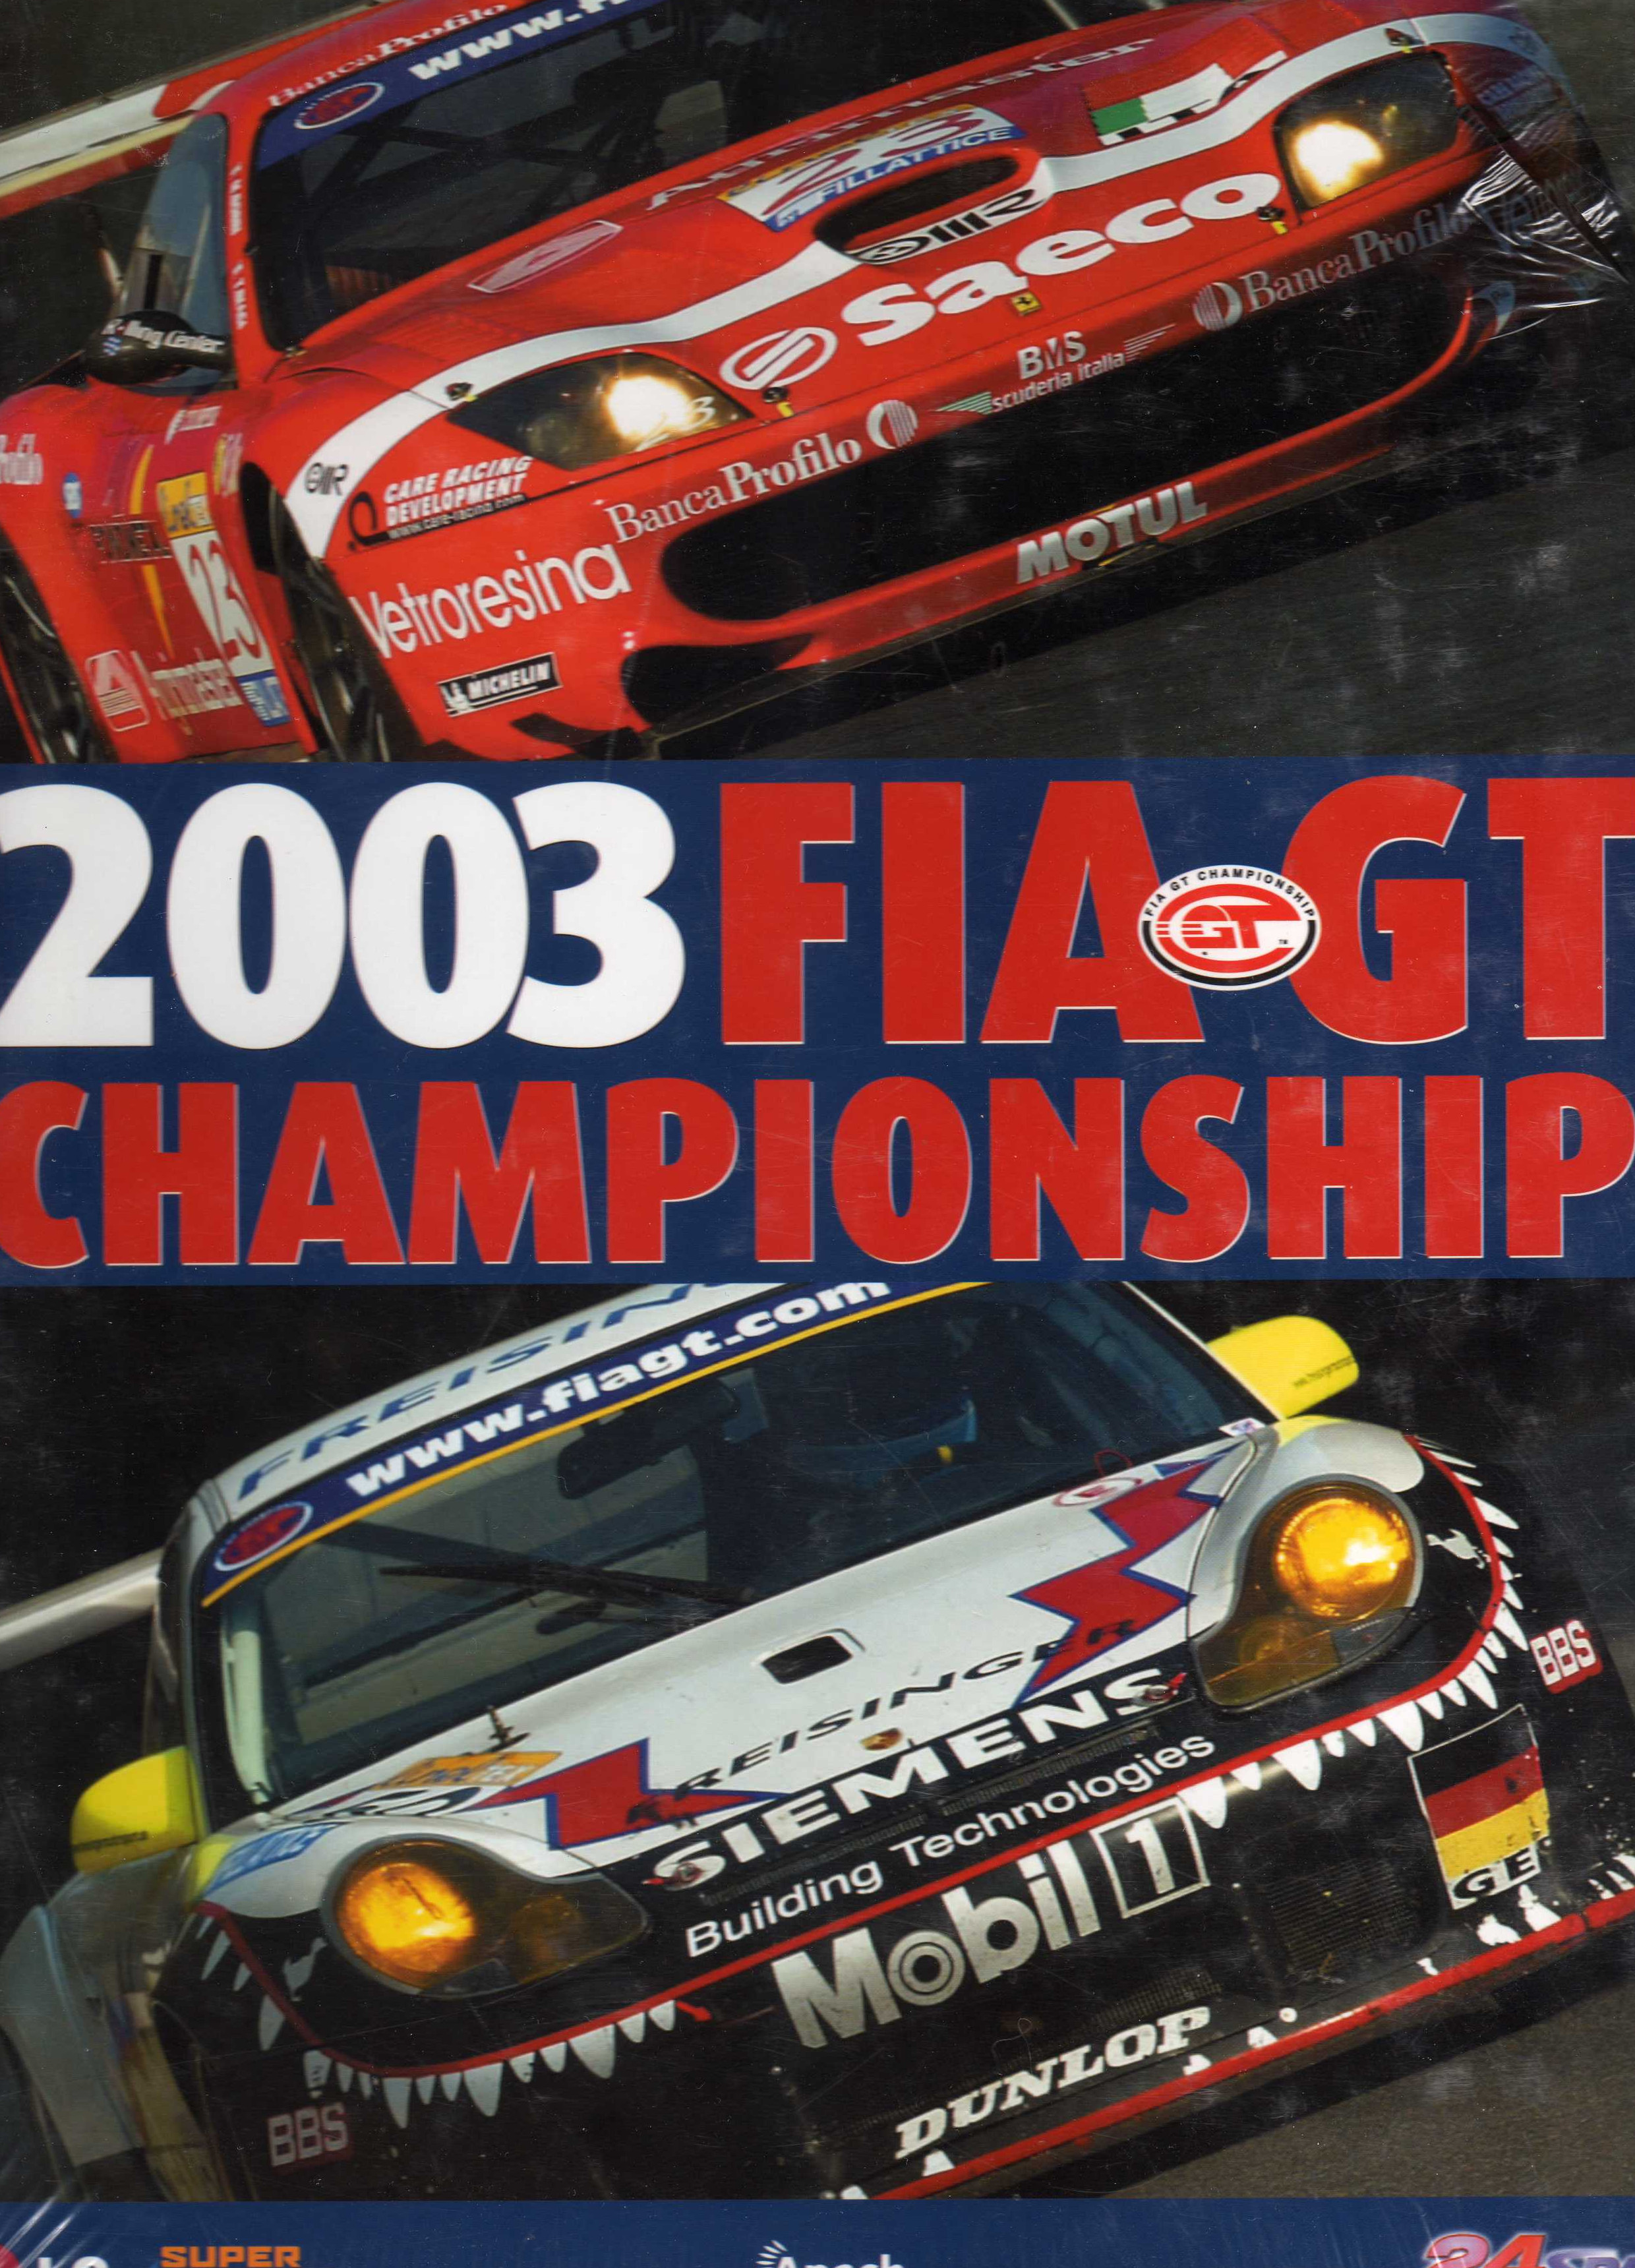 FIA GT Championship Yearbooks The Motor Racing Programme